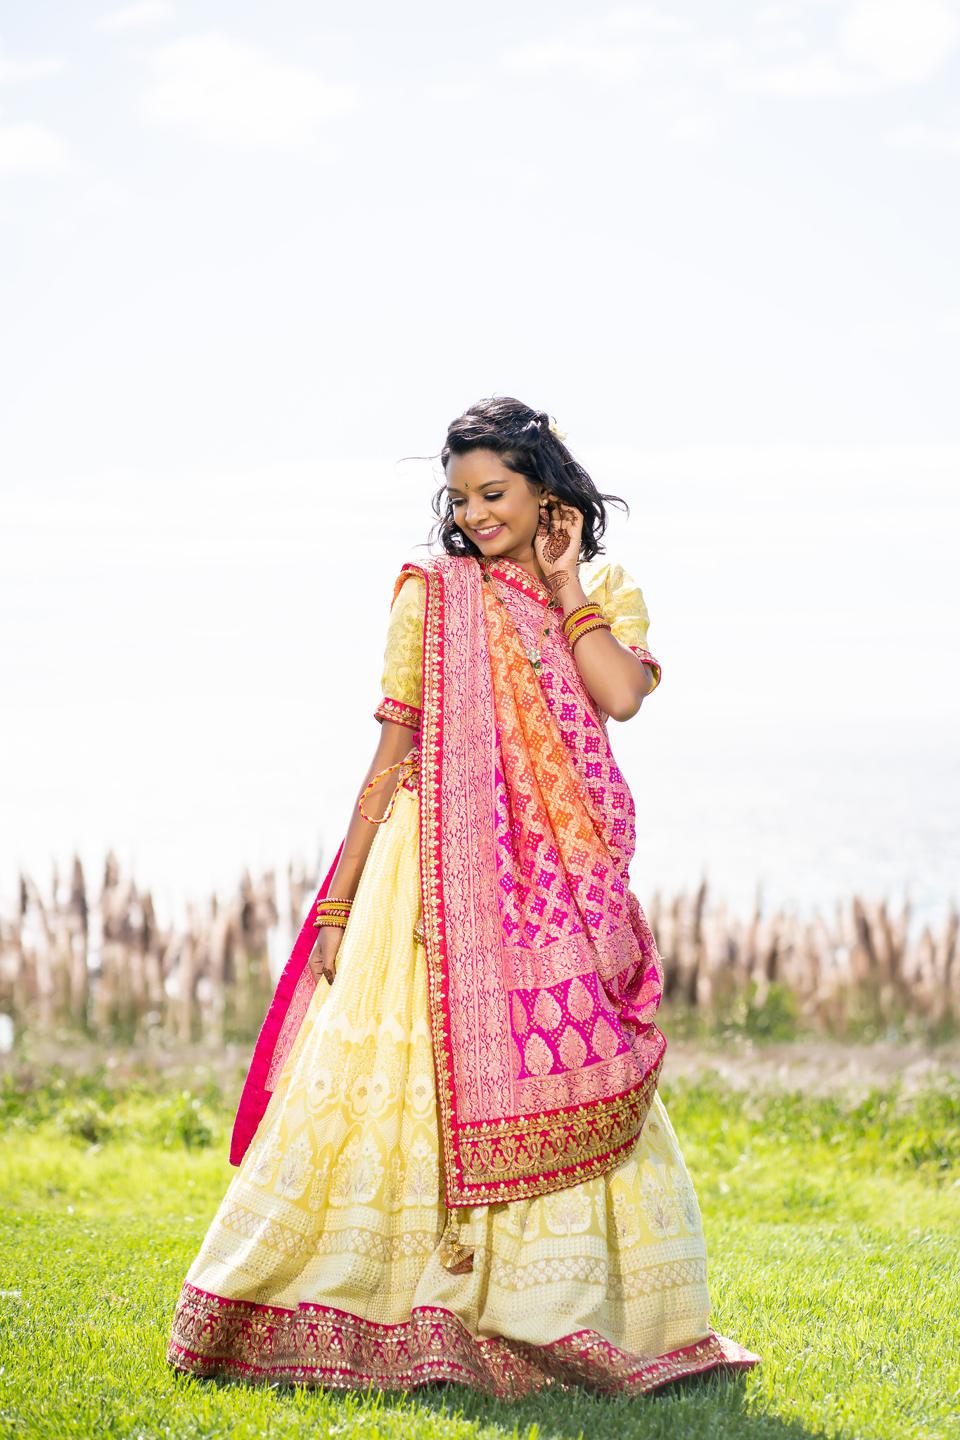 Amiti in another bright traditional dress.